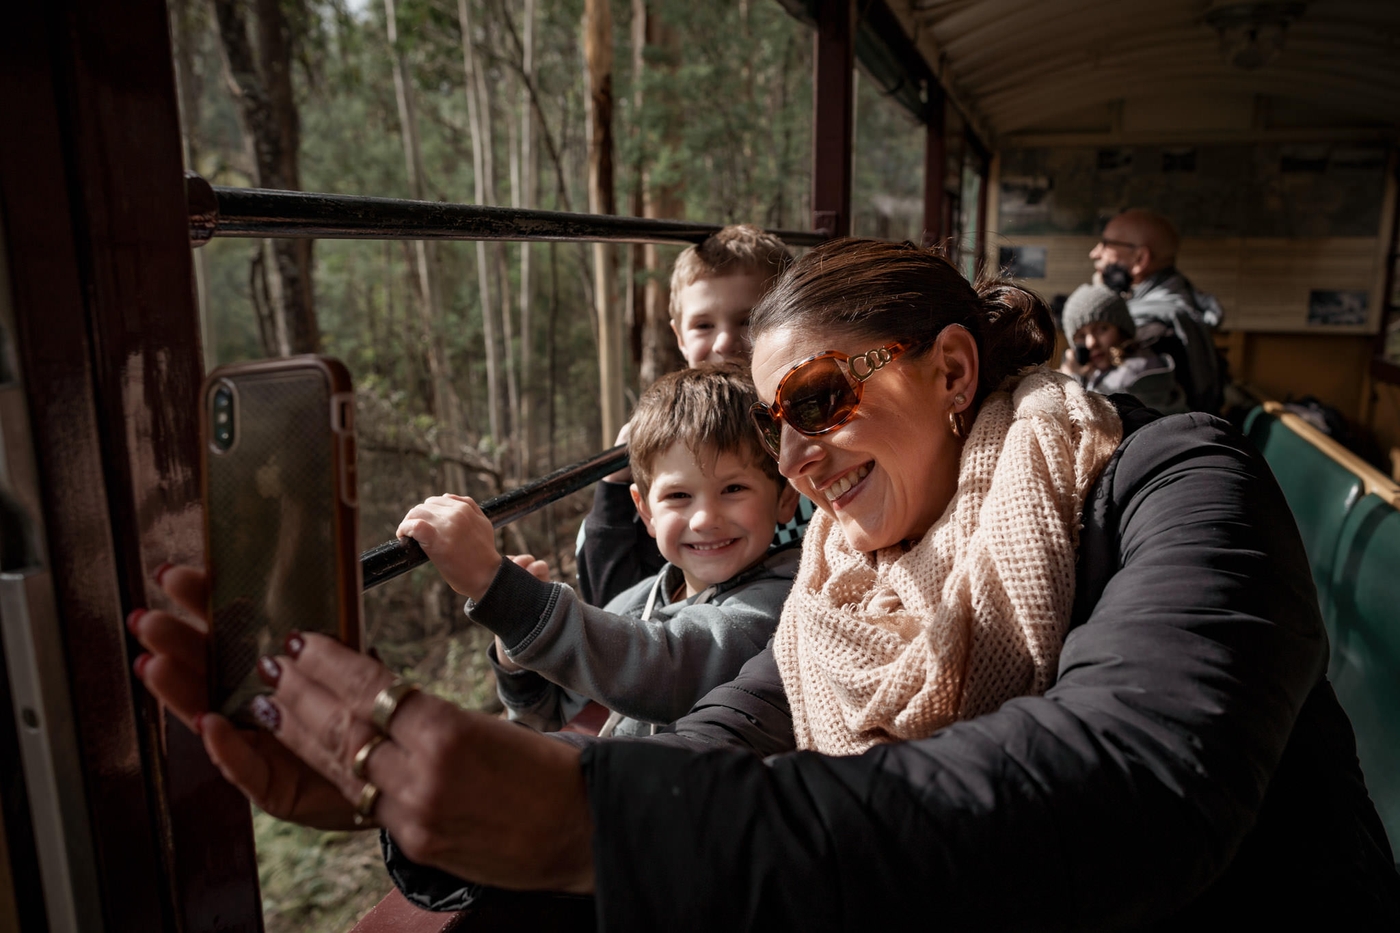 Win A Family Pass To Puffing Billy